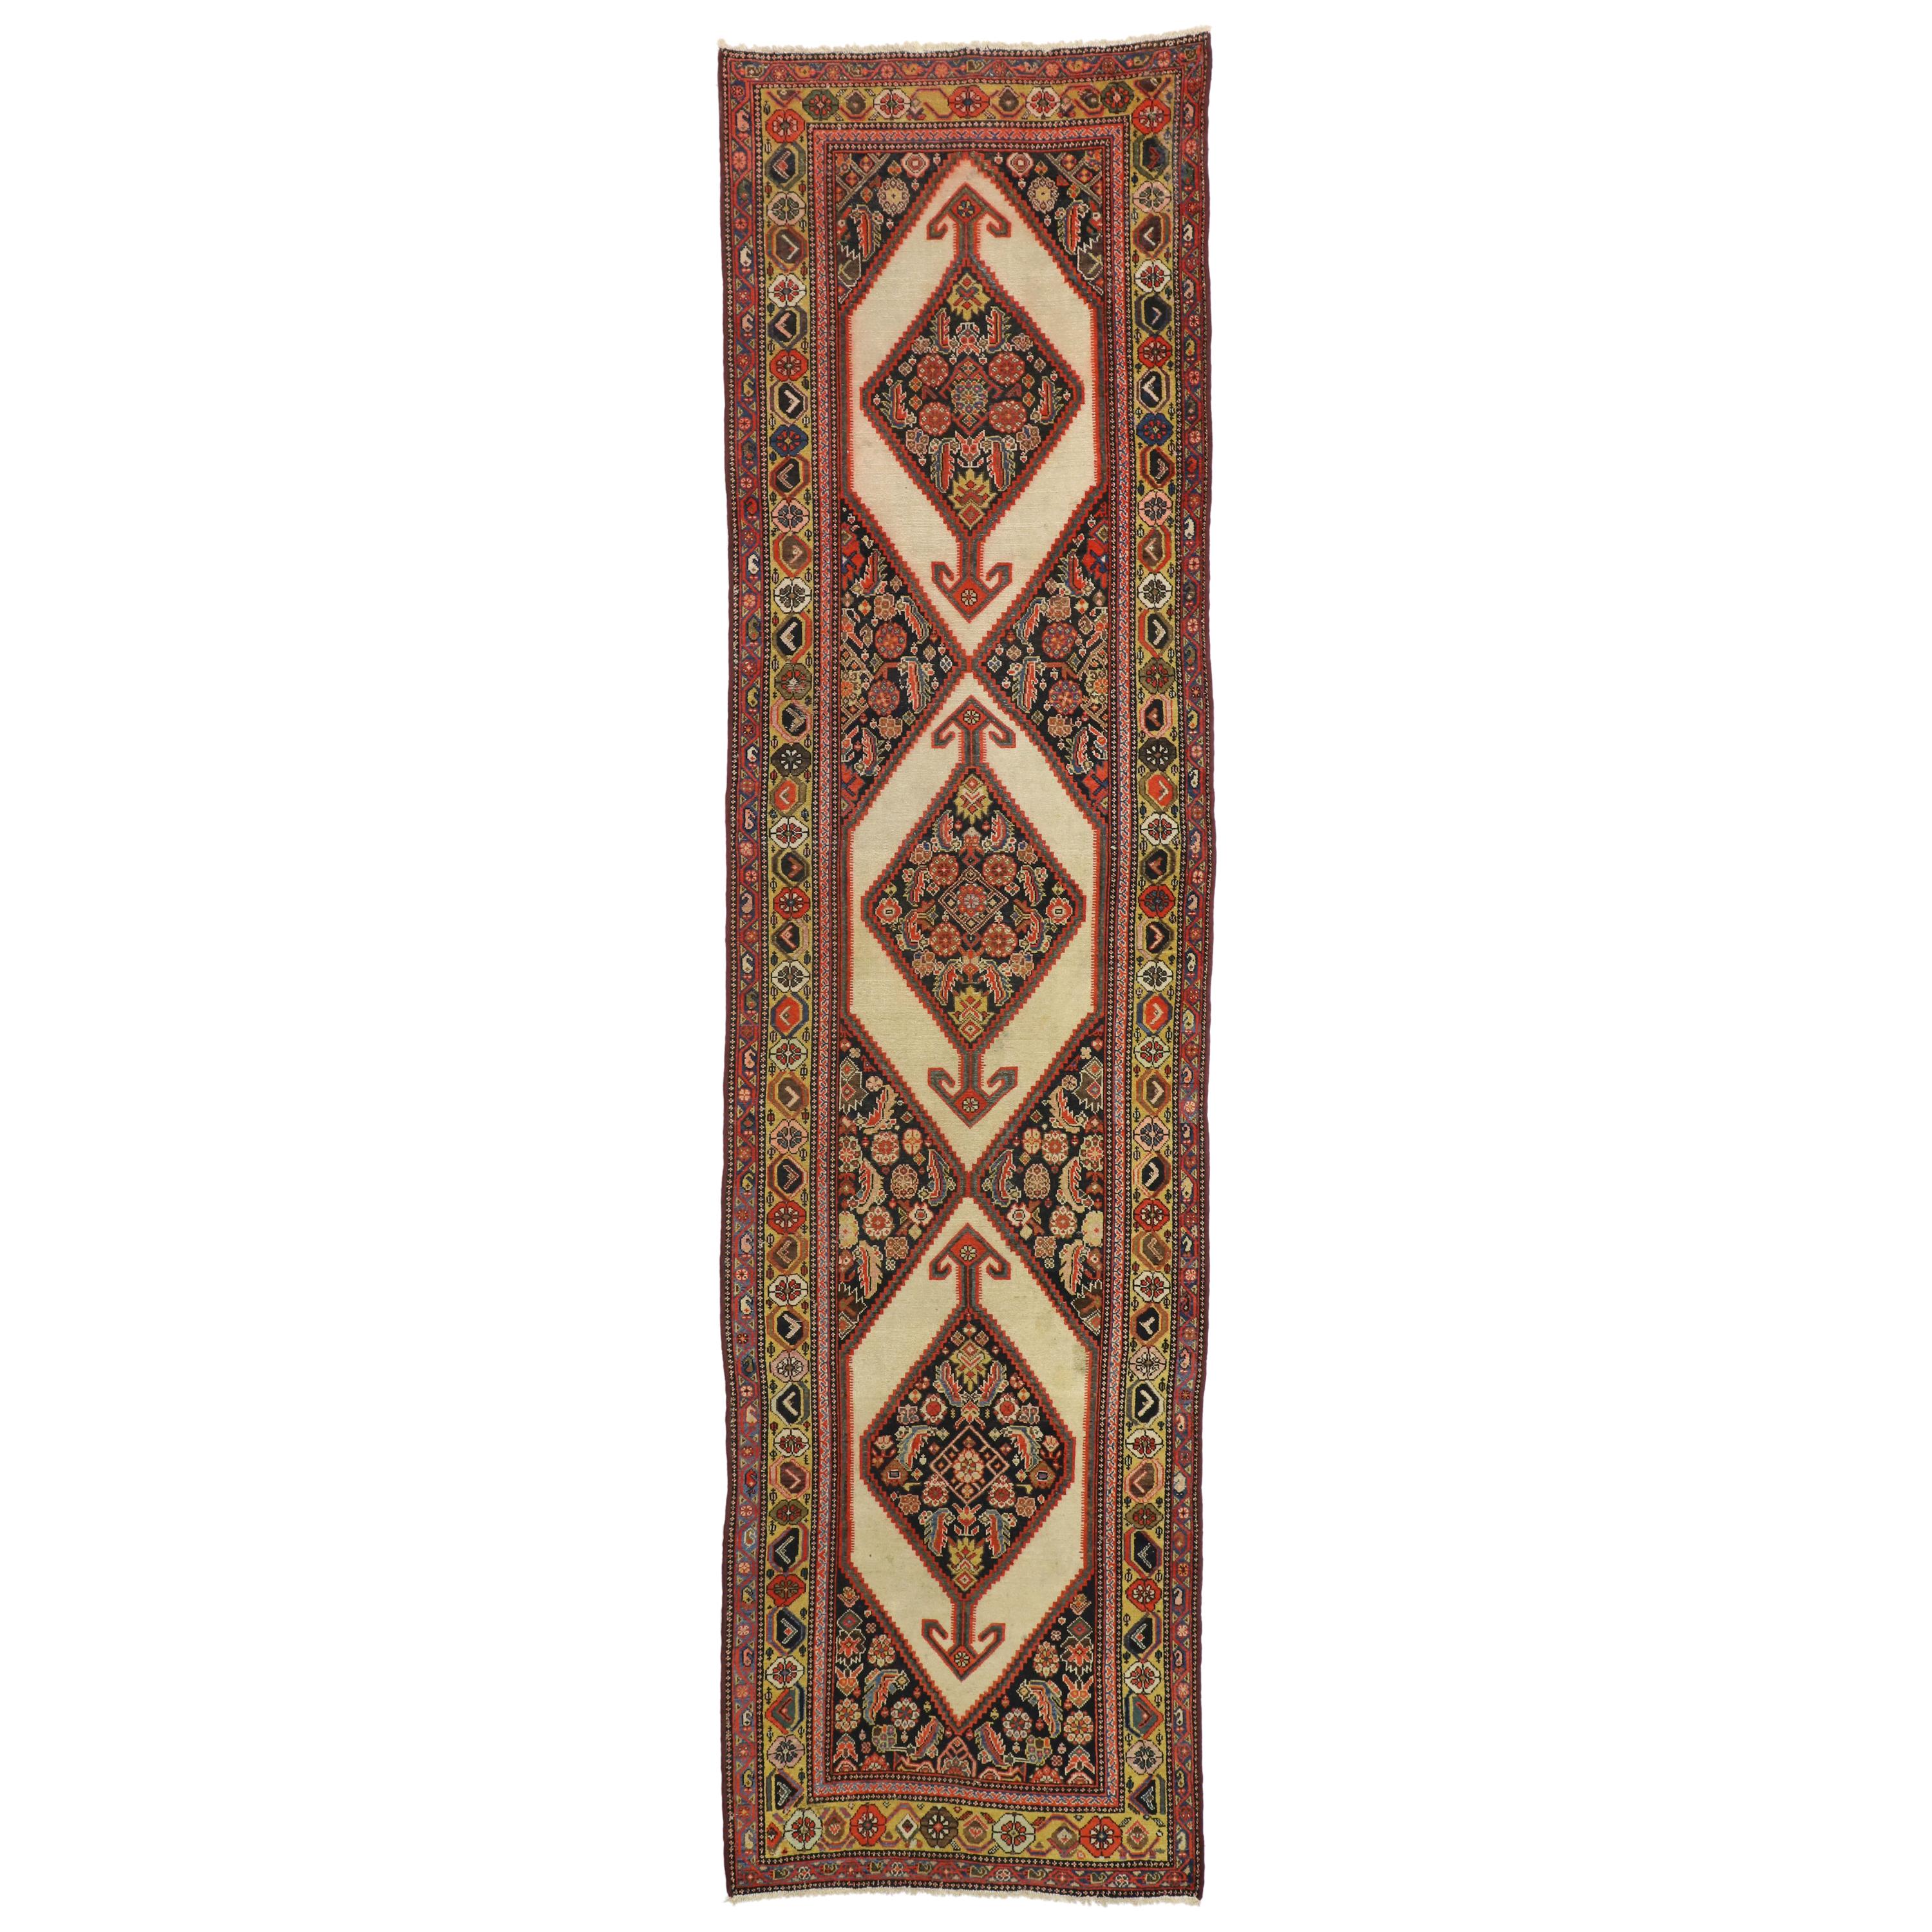 Antique Persian Malayer Runner with Tudor Manor House Style For Sale